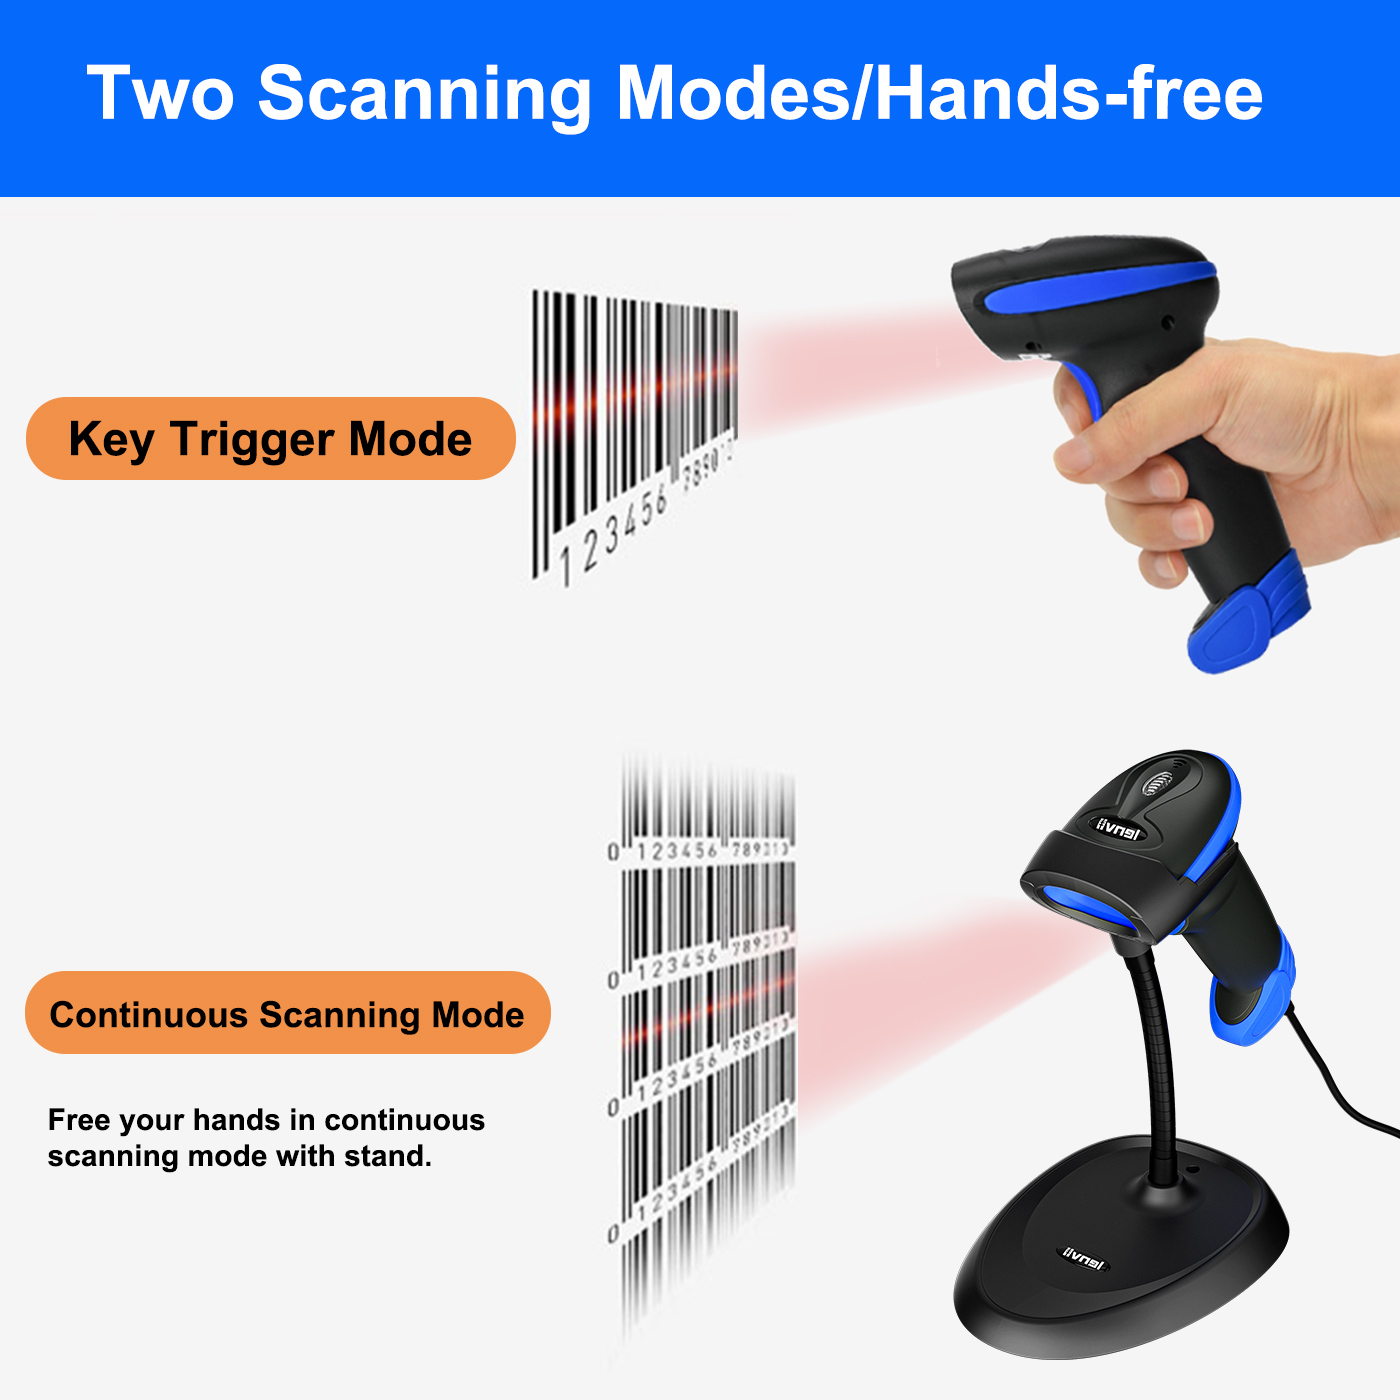 Wireless barcode scanner for access control